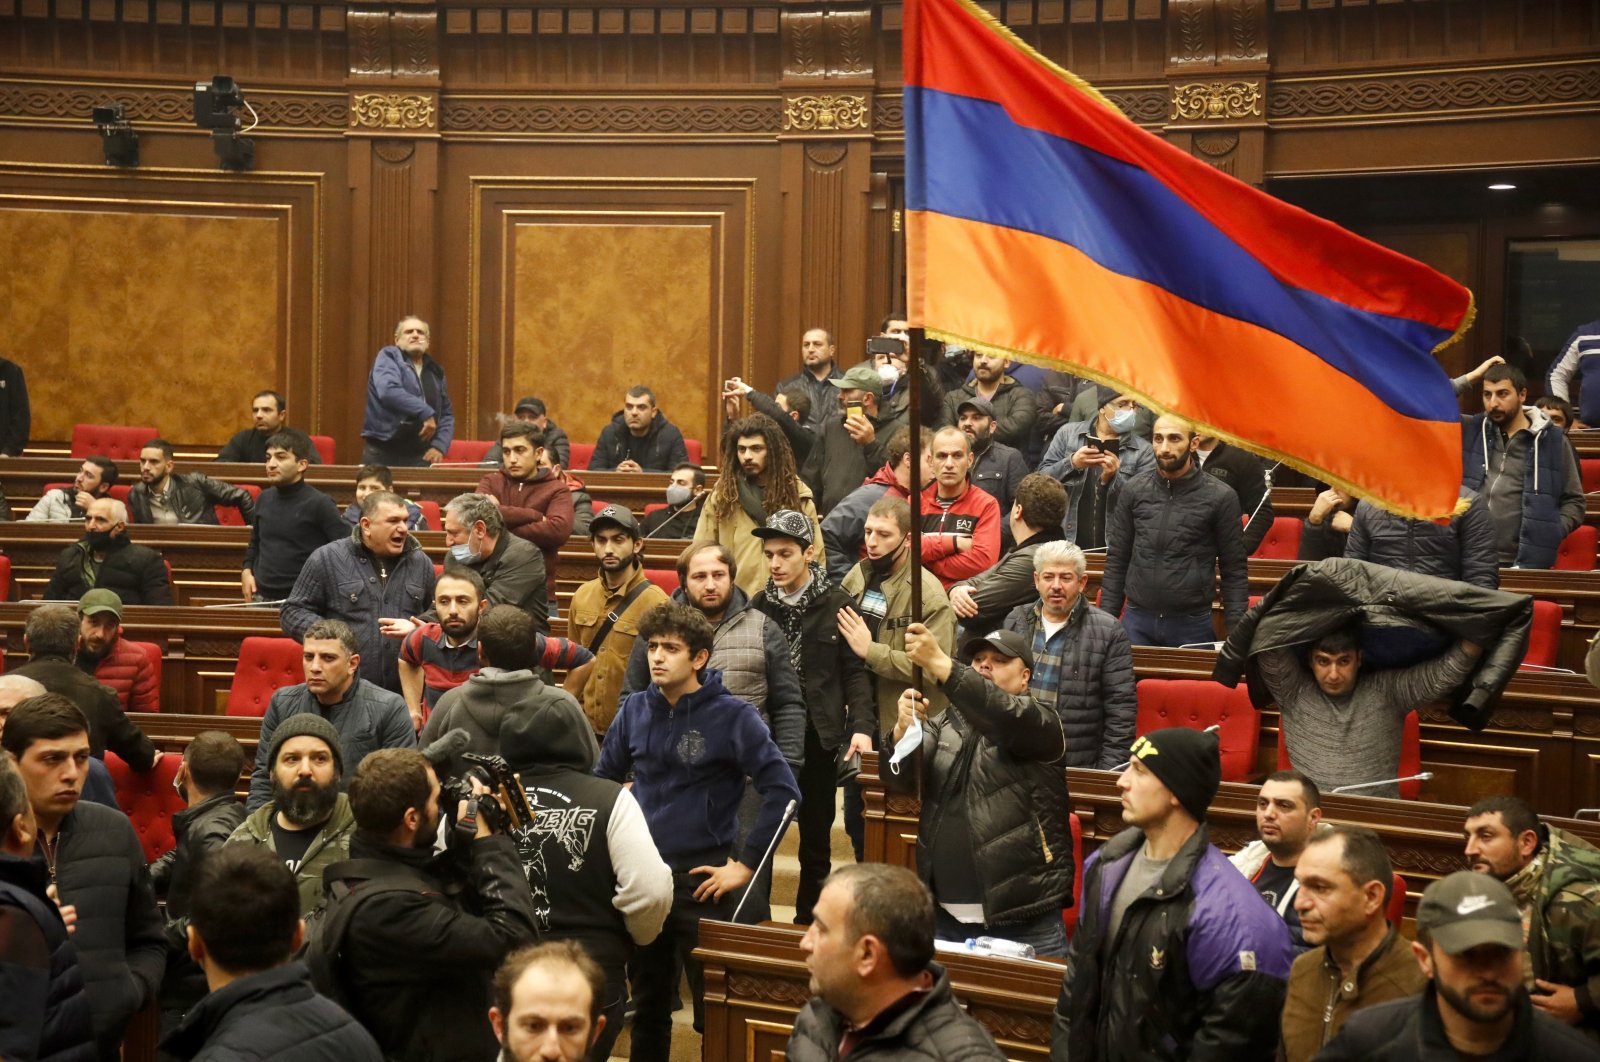 Demonstrators wave an Armenian flag in protest against a peace deal over the Nagorno-Karabakh region, at the national parliament building in Yerevan, Armenia, Tuesday, Nov. 10, 2020. (AP Photo)